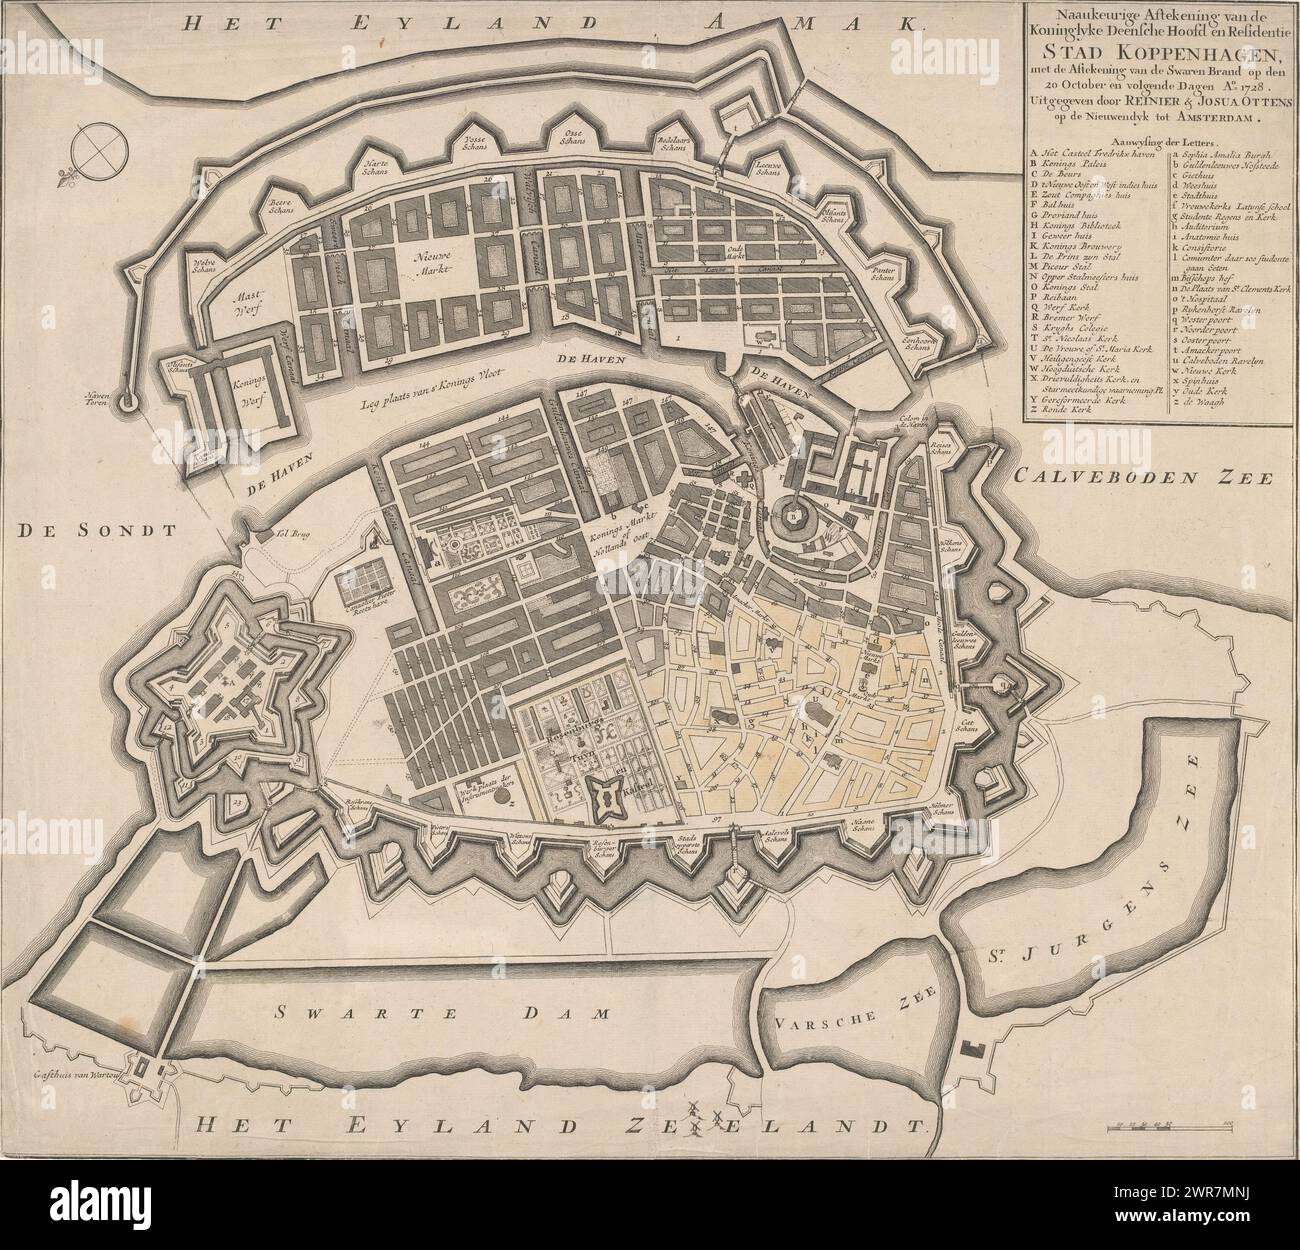 Map of Copenhagen, Accurate drawing of the royal Danish capital and residence of the city of Copenhagen (...) (title on object), Map of Copenhagen showing the damage from the fire of October 1728. The part of the city colored yellow (bottom right) was reduced to ashes during the fire. On either side of the map there is a legend showing the streets of the city., print maker: anonymous, publisher: Reinier Ottens (I) & Josua, Amsterdam, after c. 1728, paper, engraving, etching, height 456 mm × width 510 mm, print Stock Photo